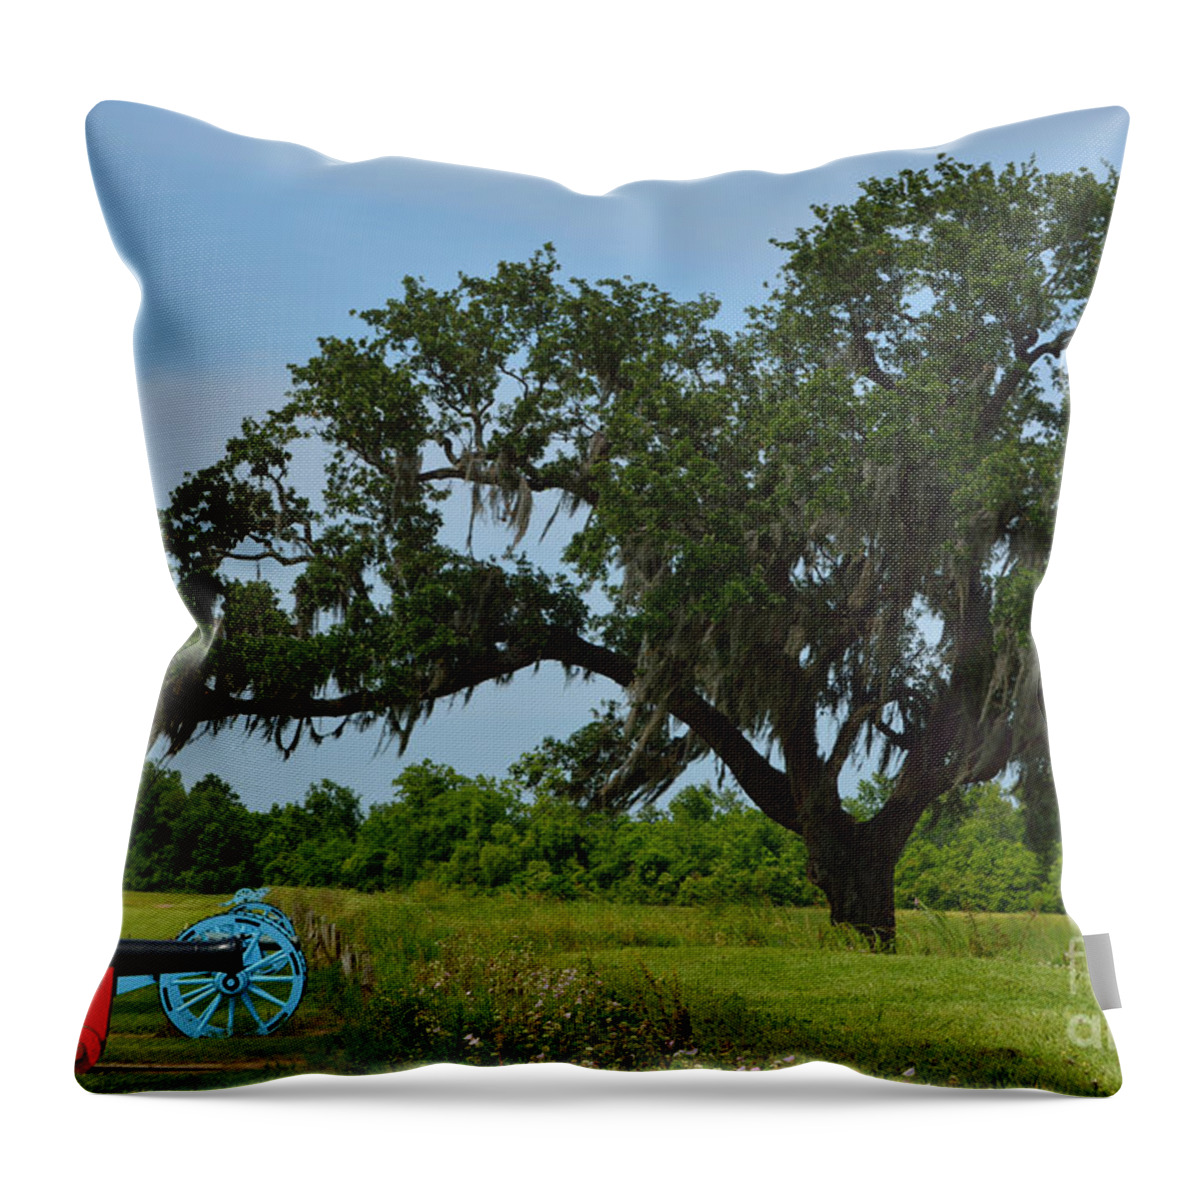 Battle Of New Orleans Throw Pillow featuring the photograph Serenity by Alys Caviness-Gober